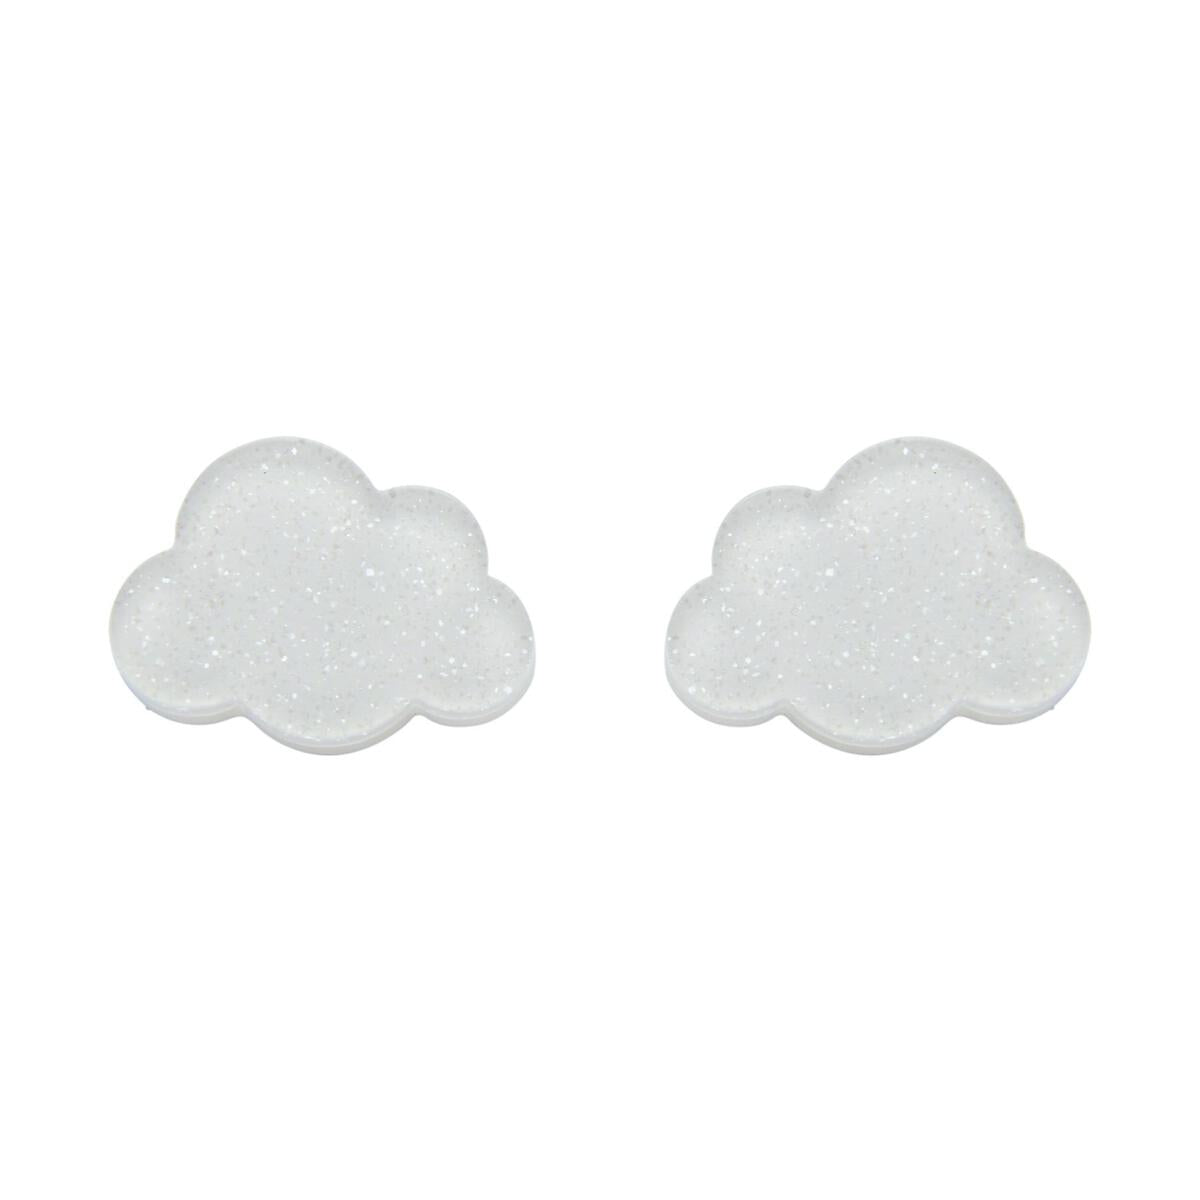 pair 7/8" cloud shaped post earrings in glittery white 100% acrylic resin